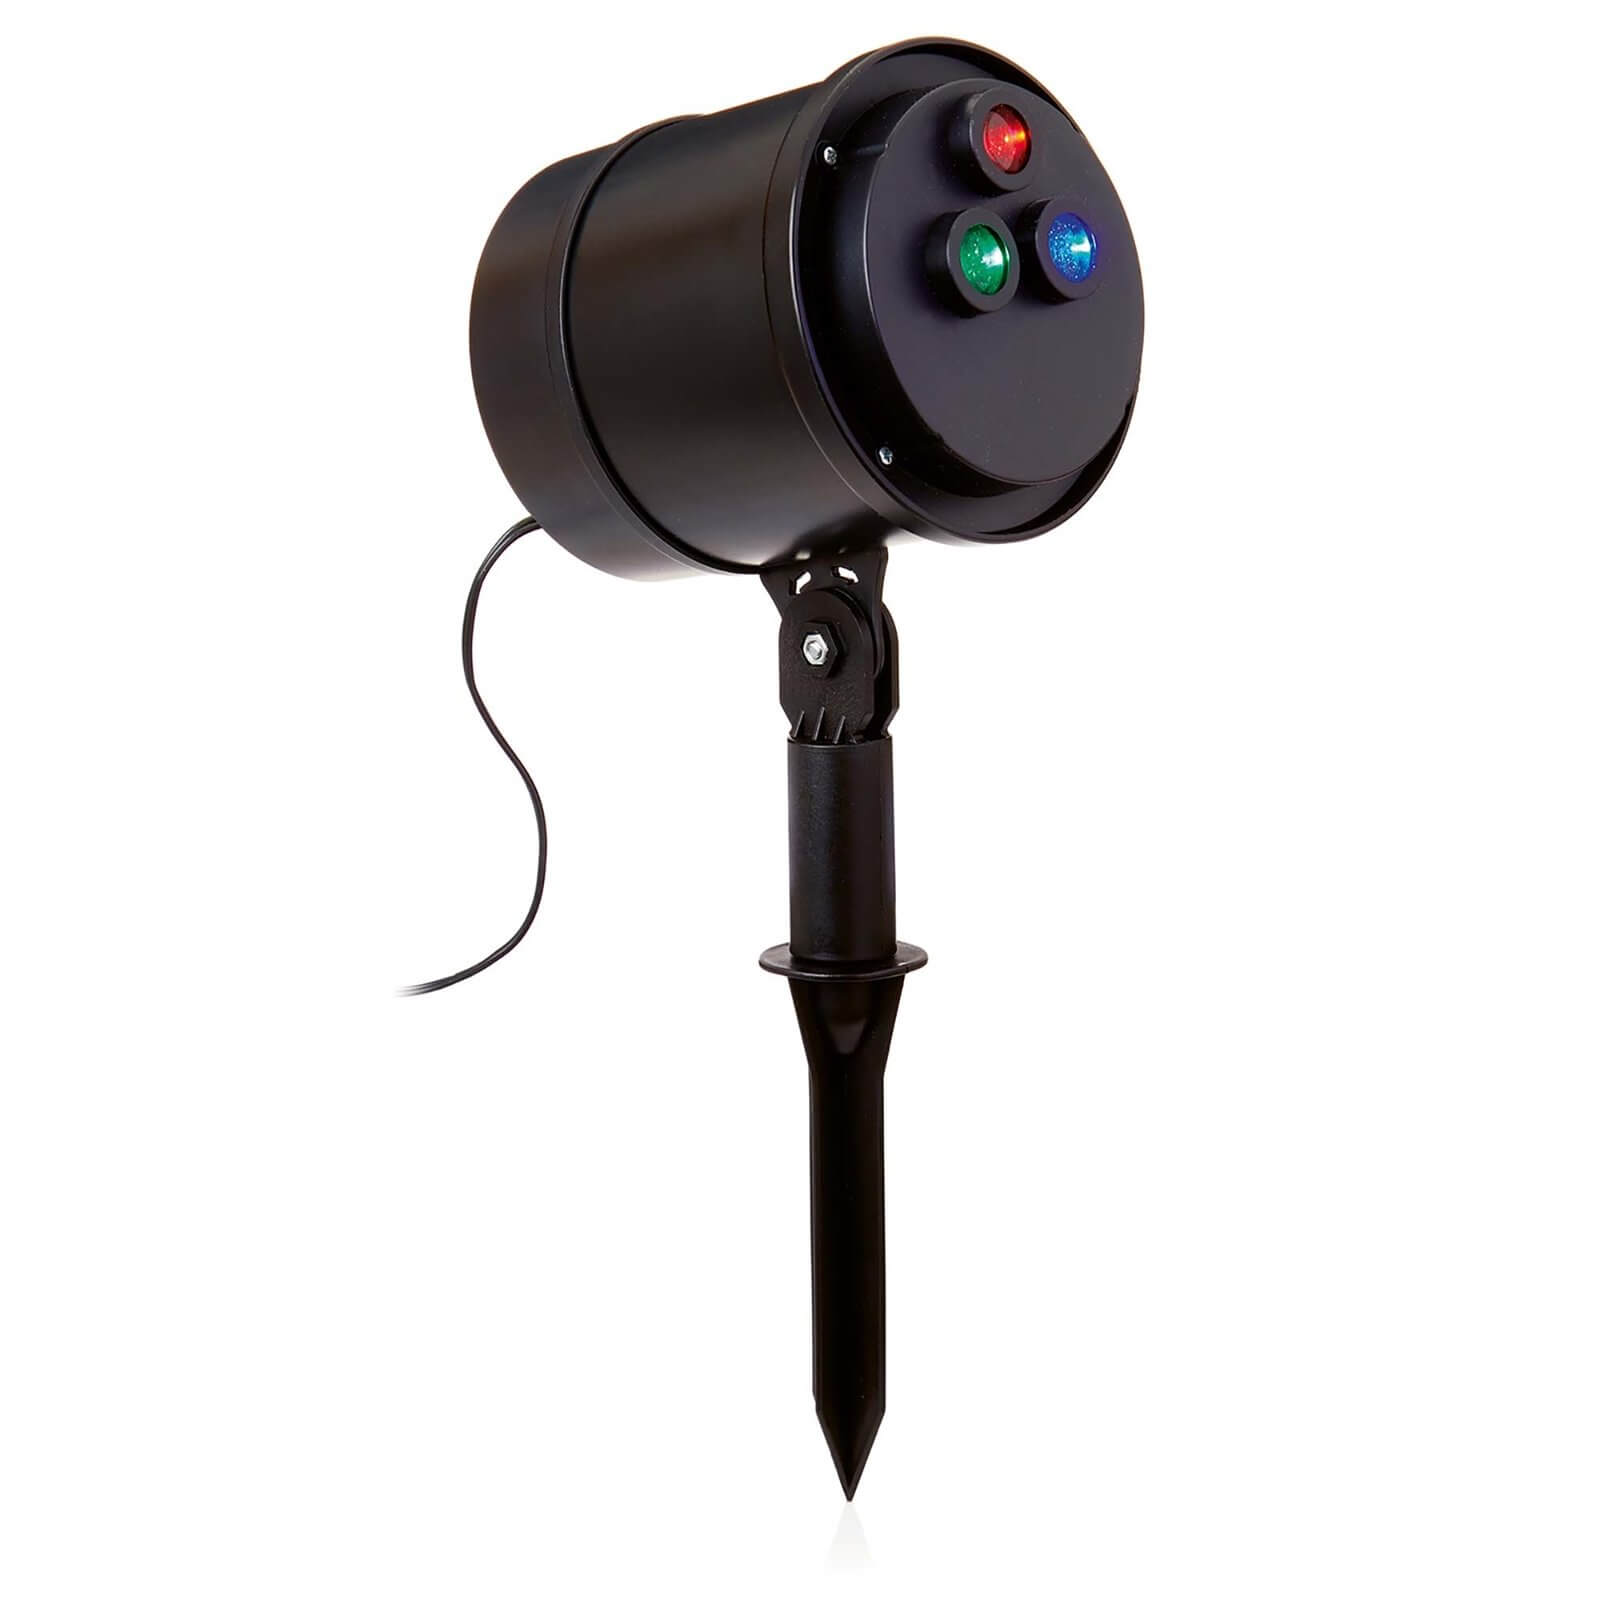 Firework Projector with Sound function